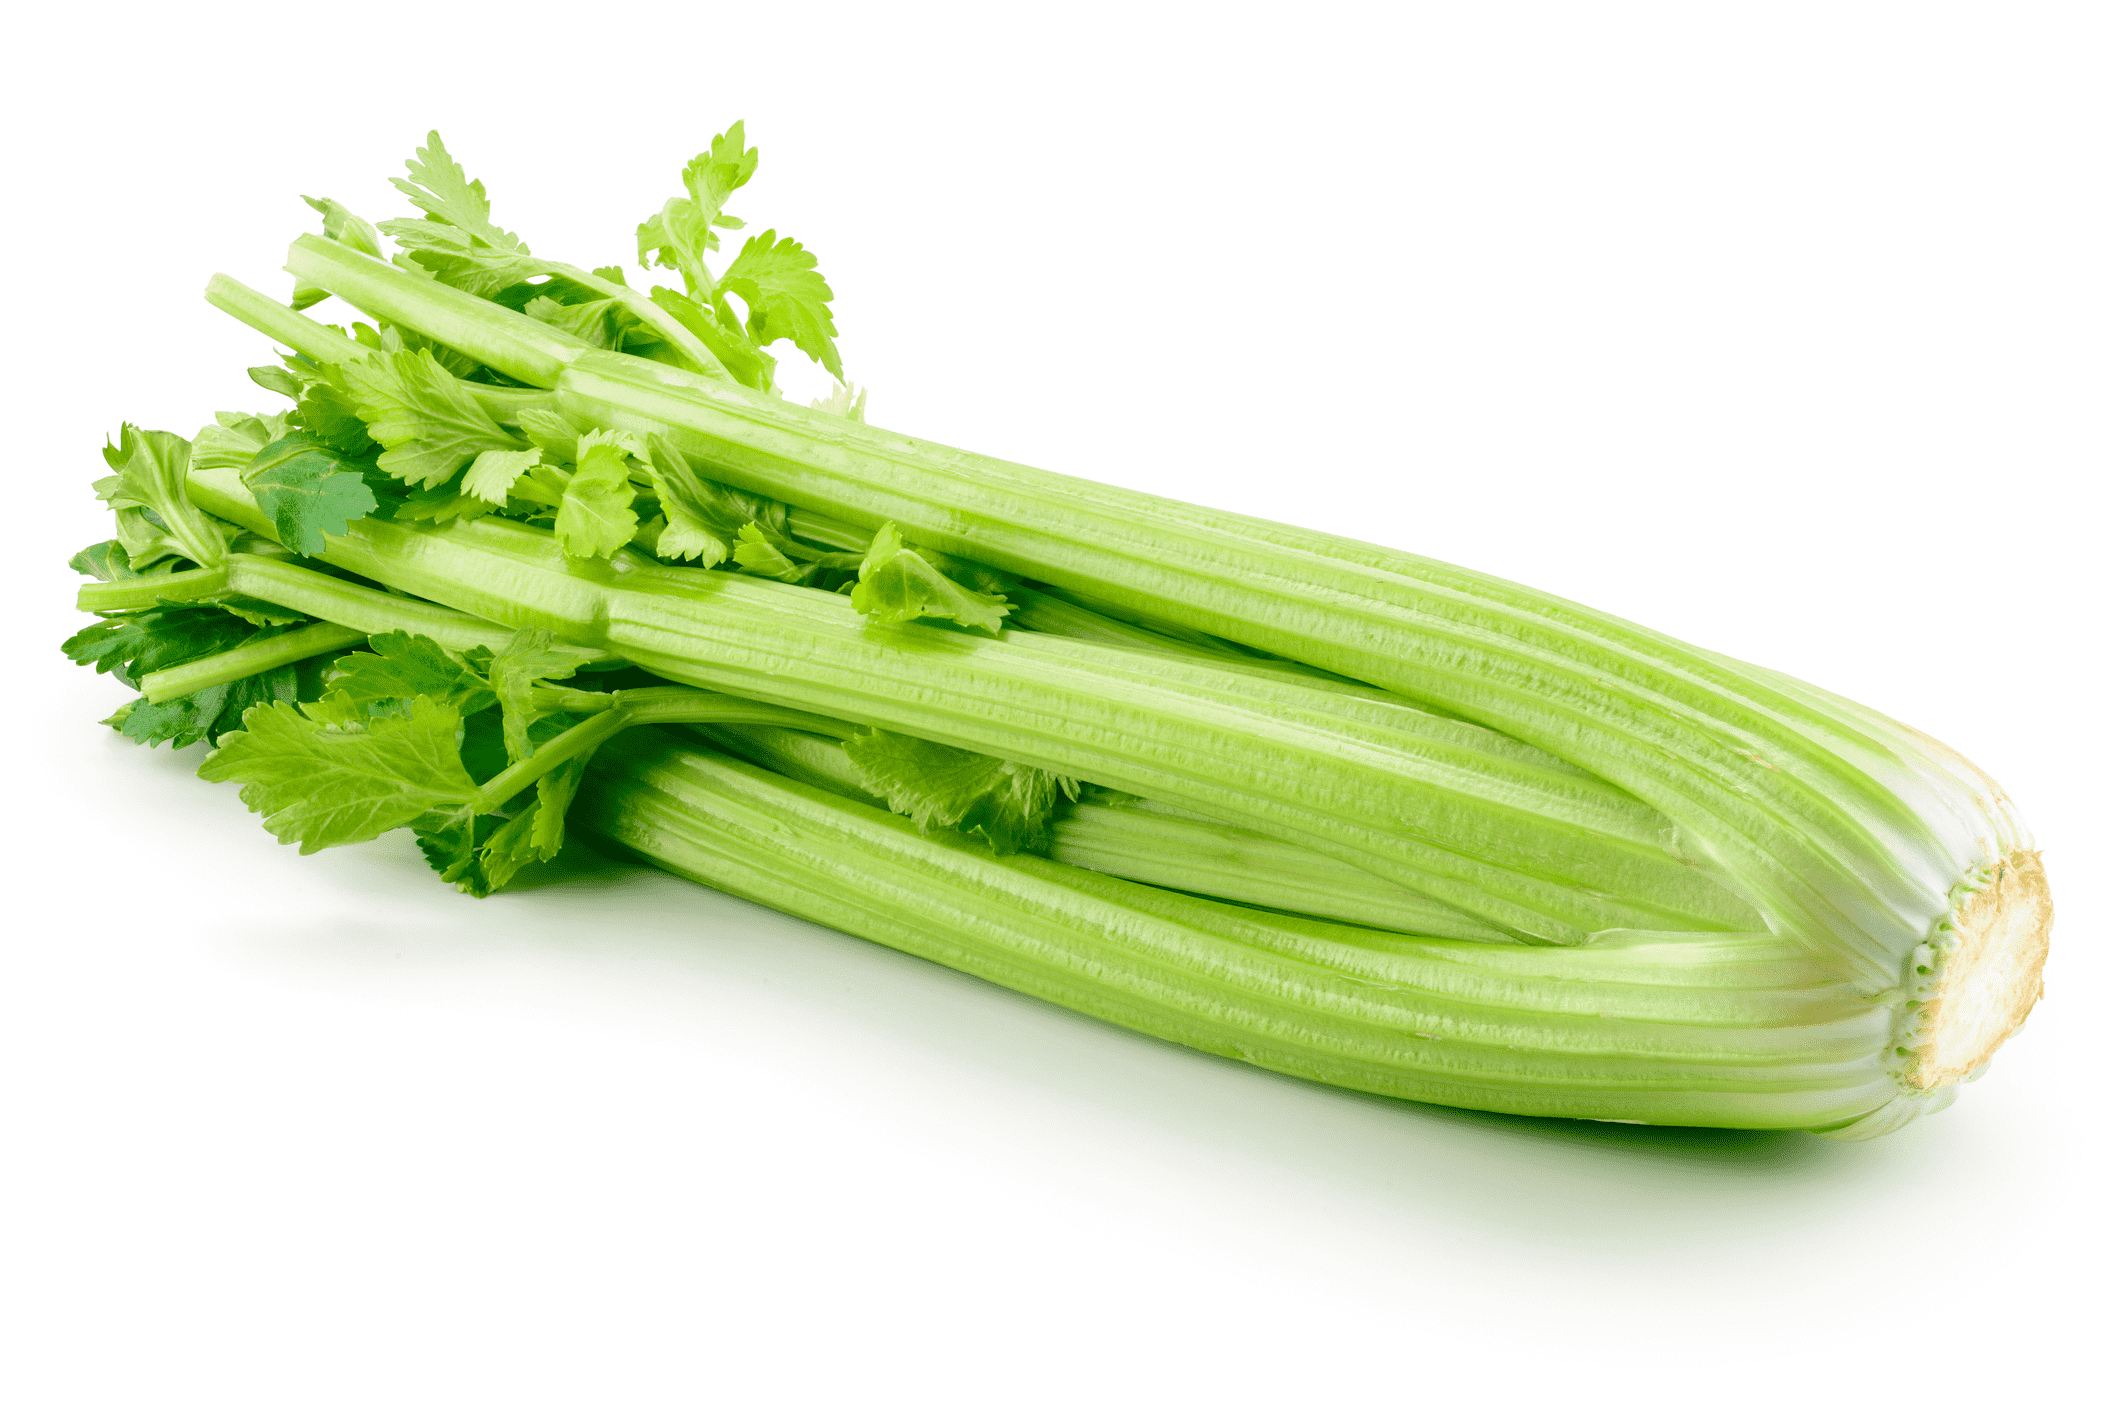 Blanched celery ca500g-750g/pack Spain